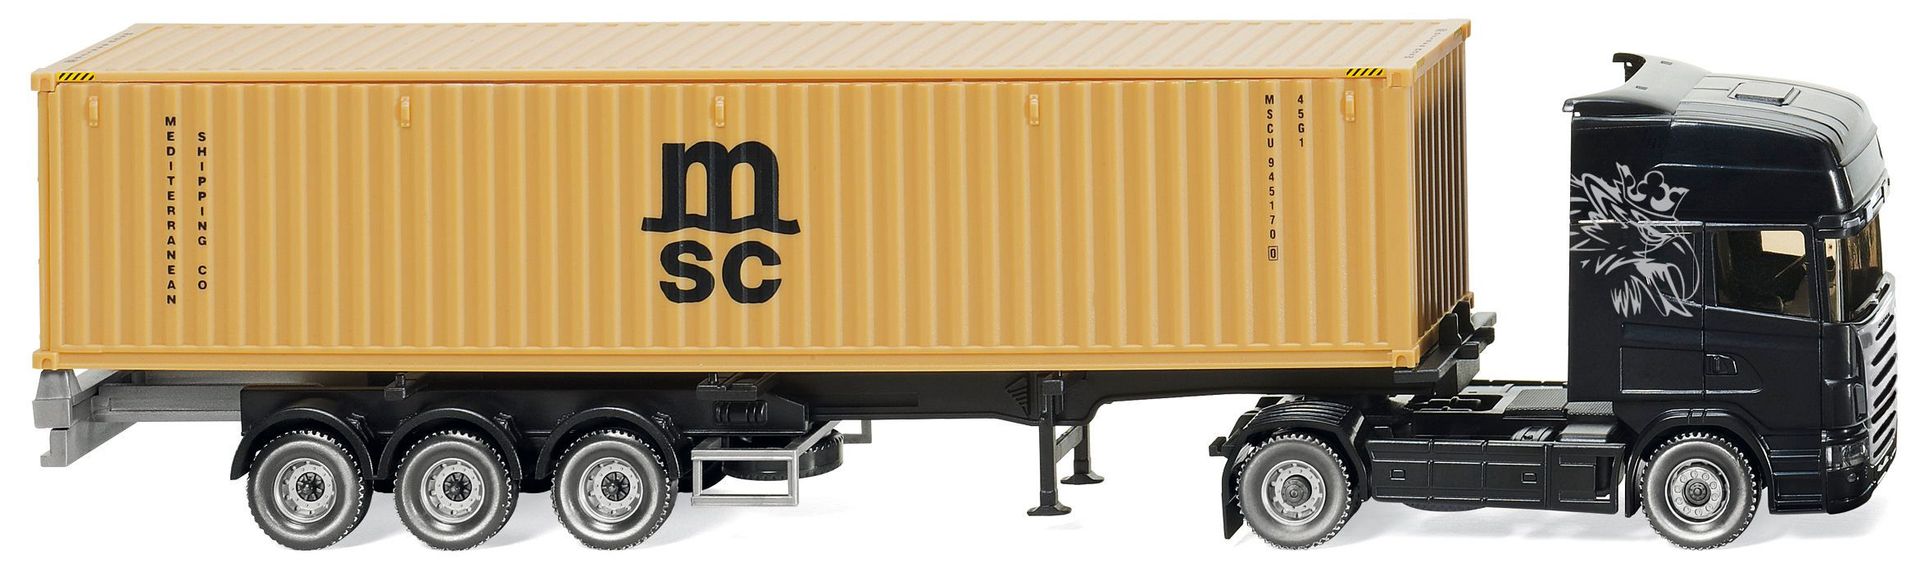 Wiking 052349 - Containersattelzug Scania MCS NG H0 1:87